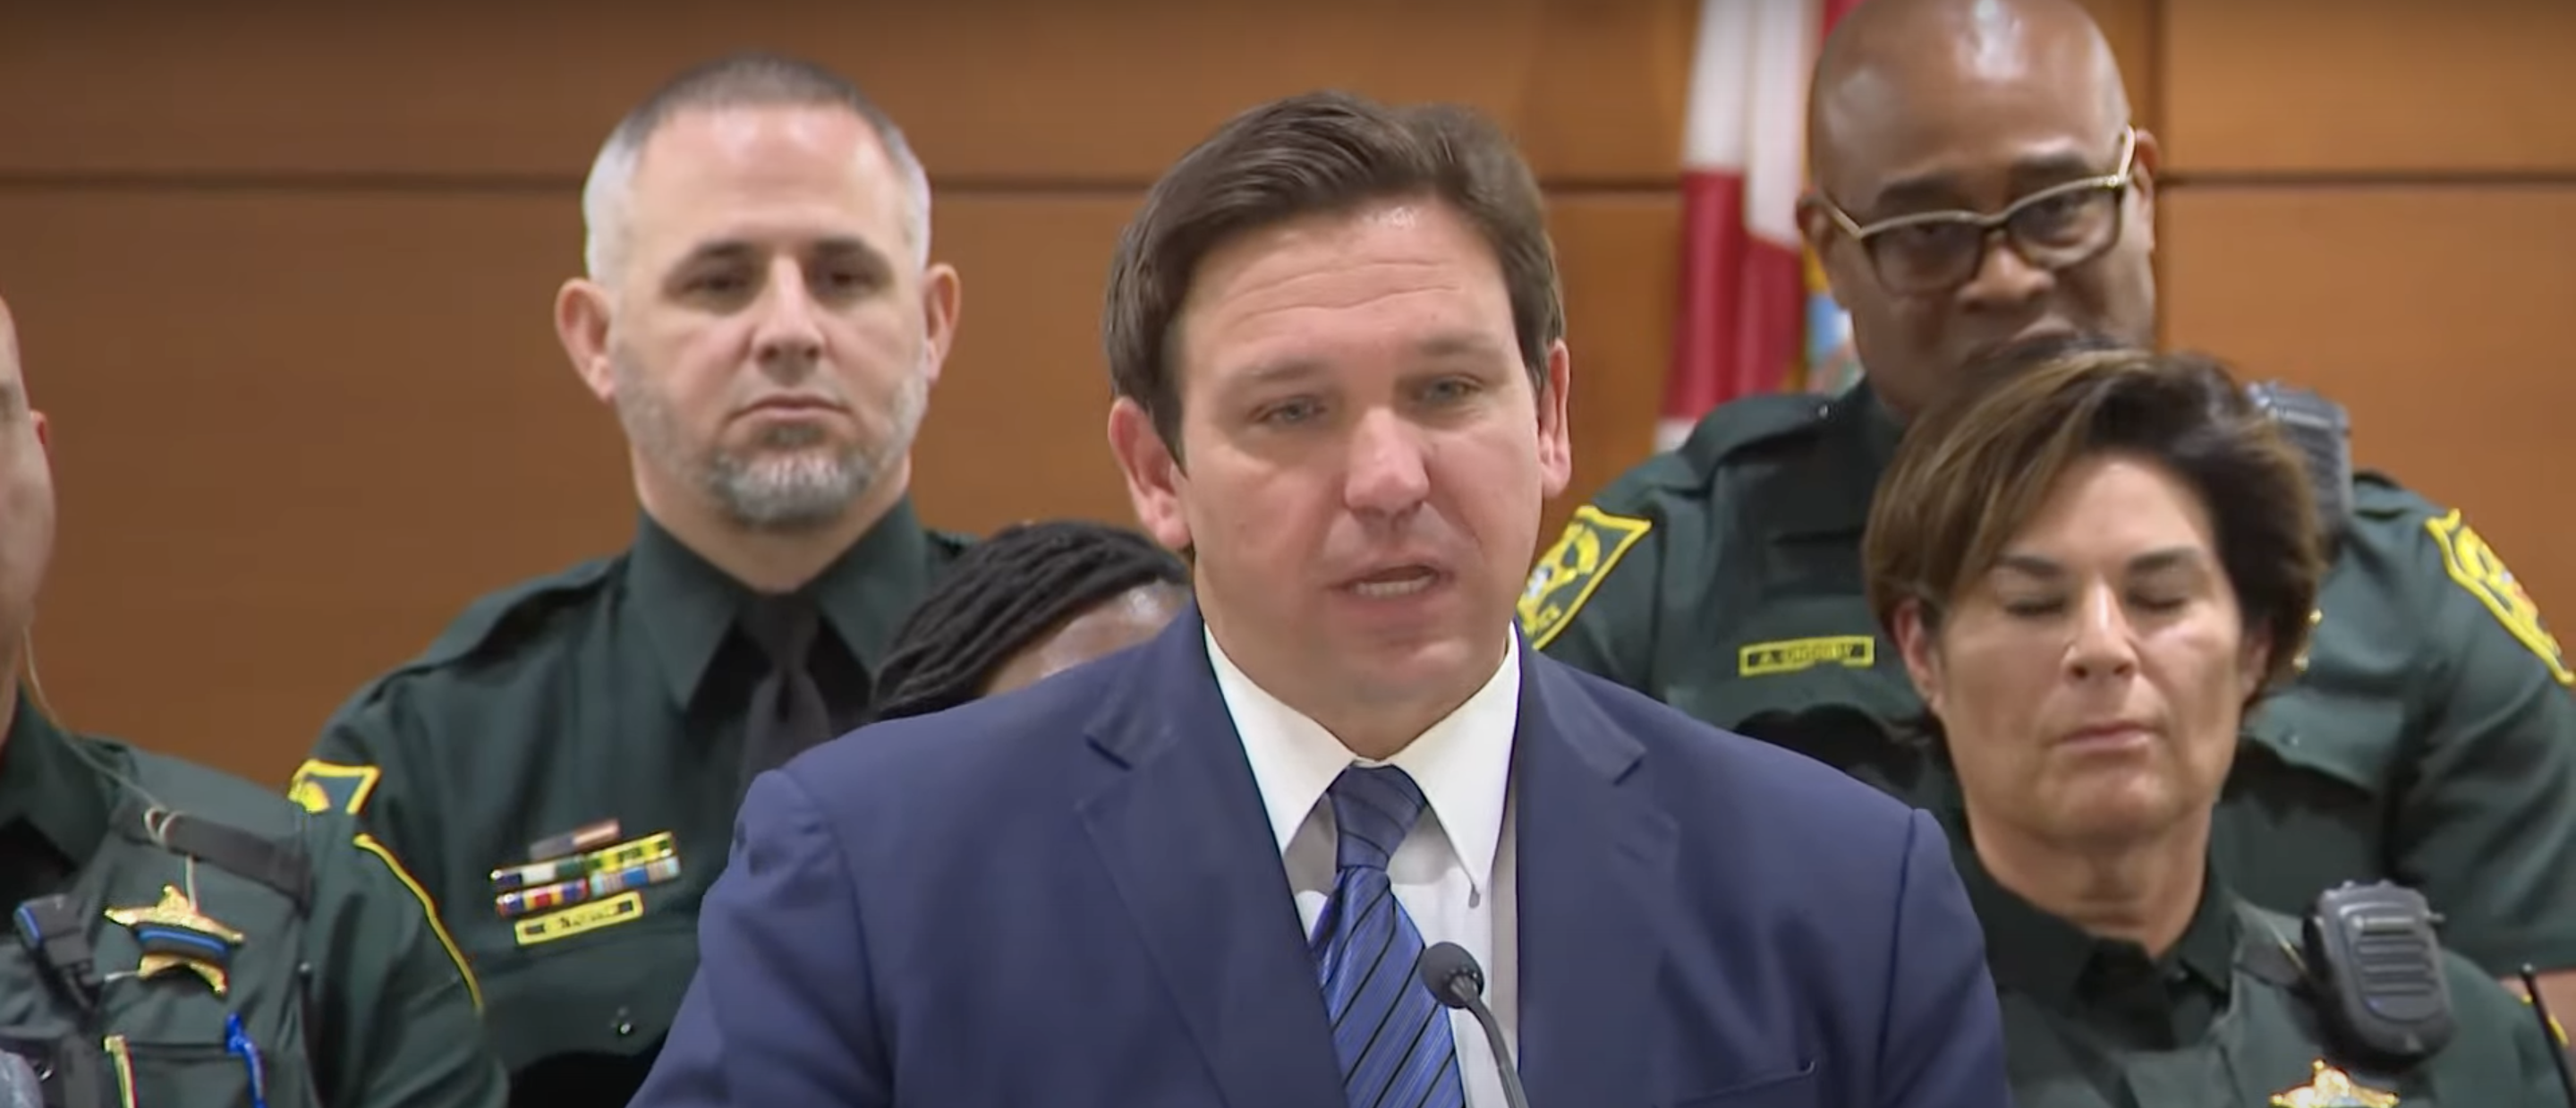 DeSantis Announces Office Of Election Crimes And Security Is Arresting 20 Individuals For Voter Fraud